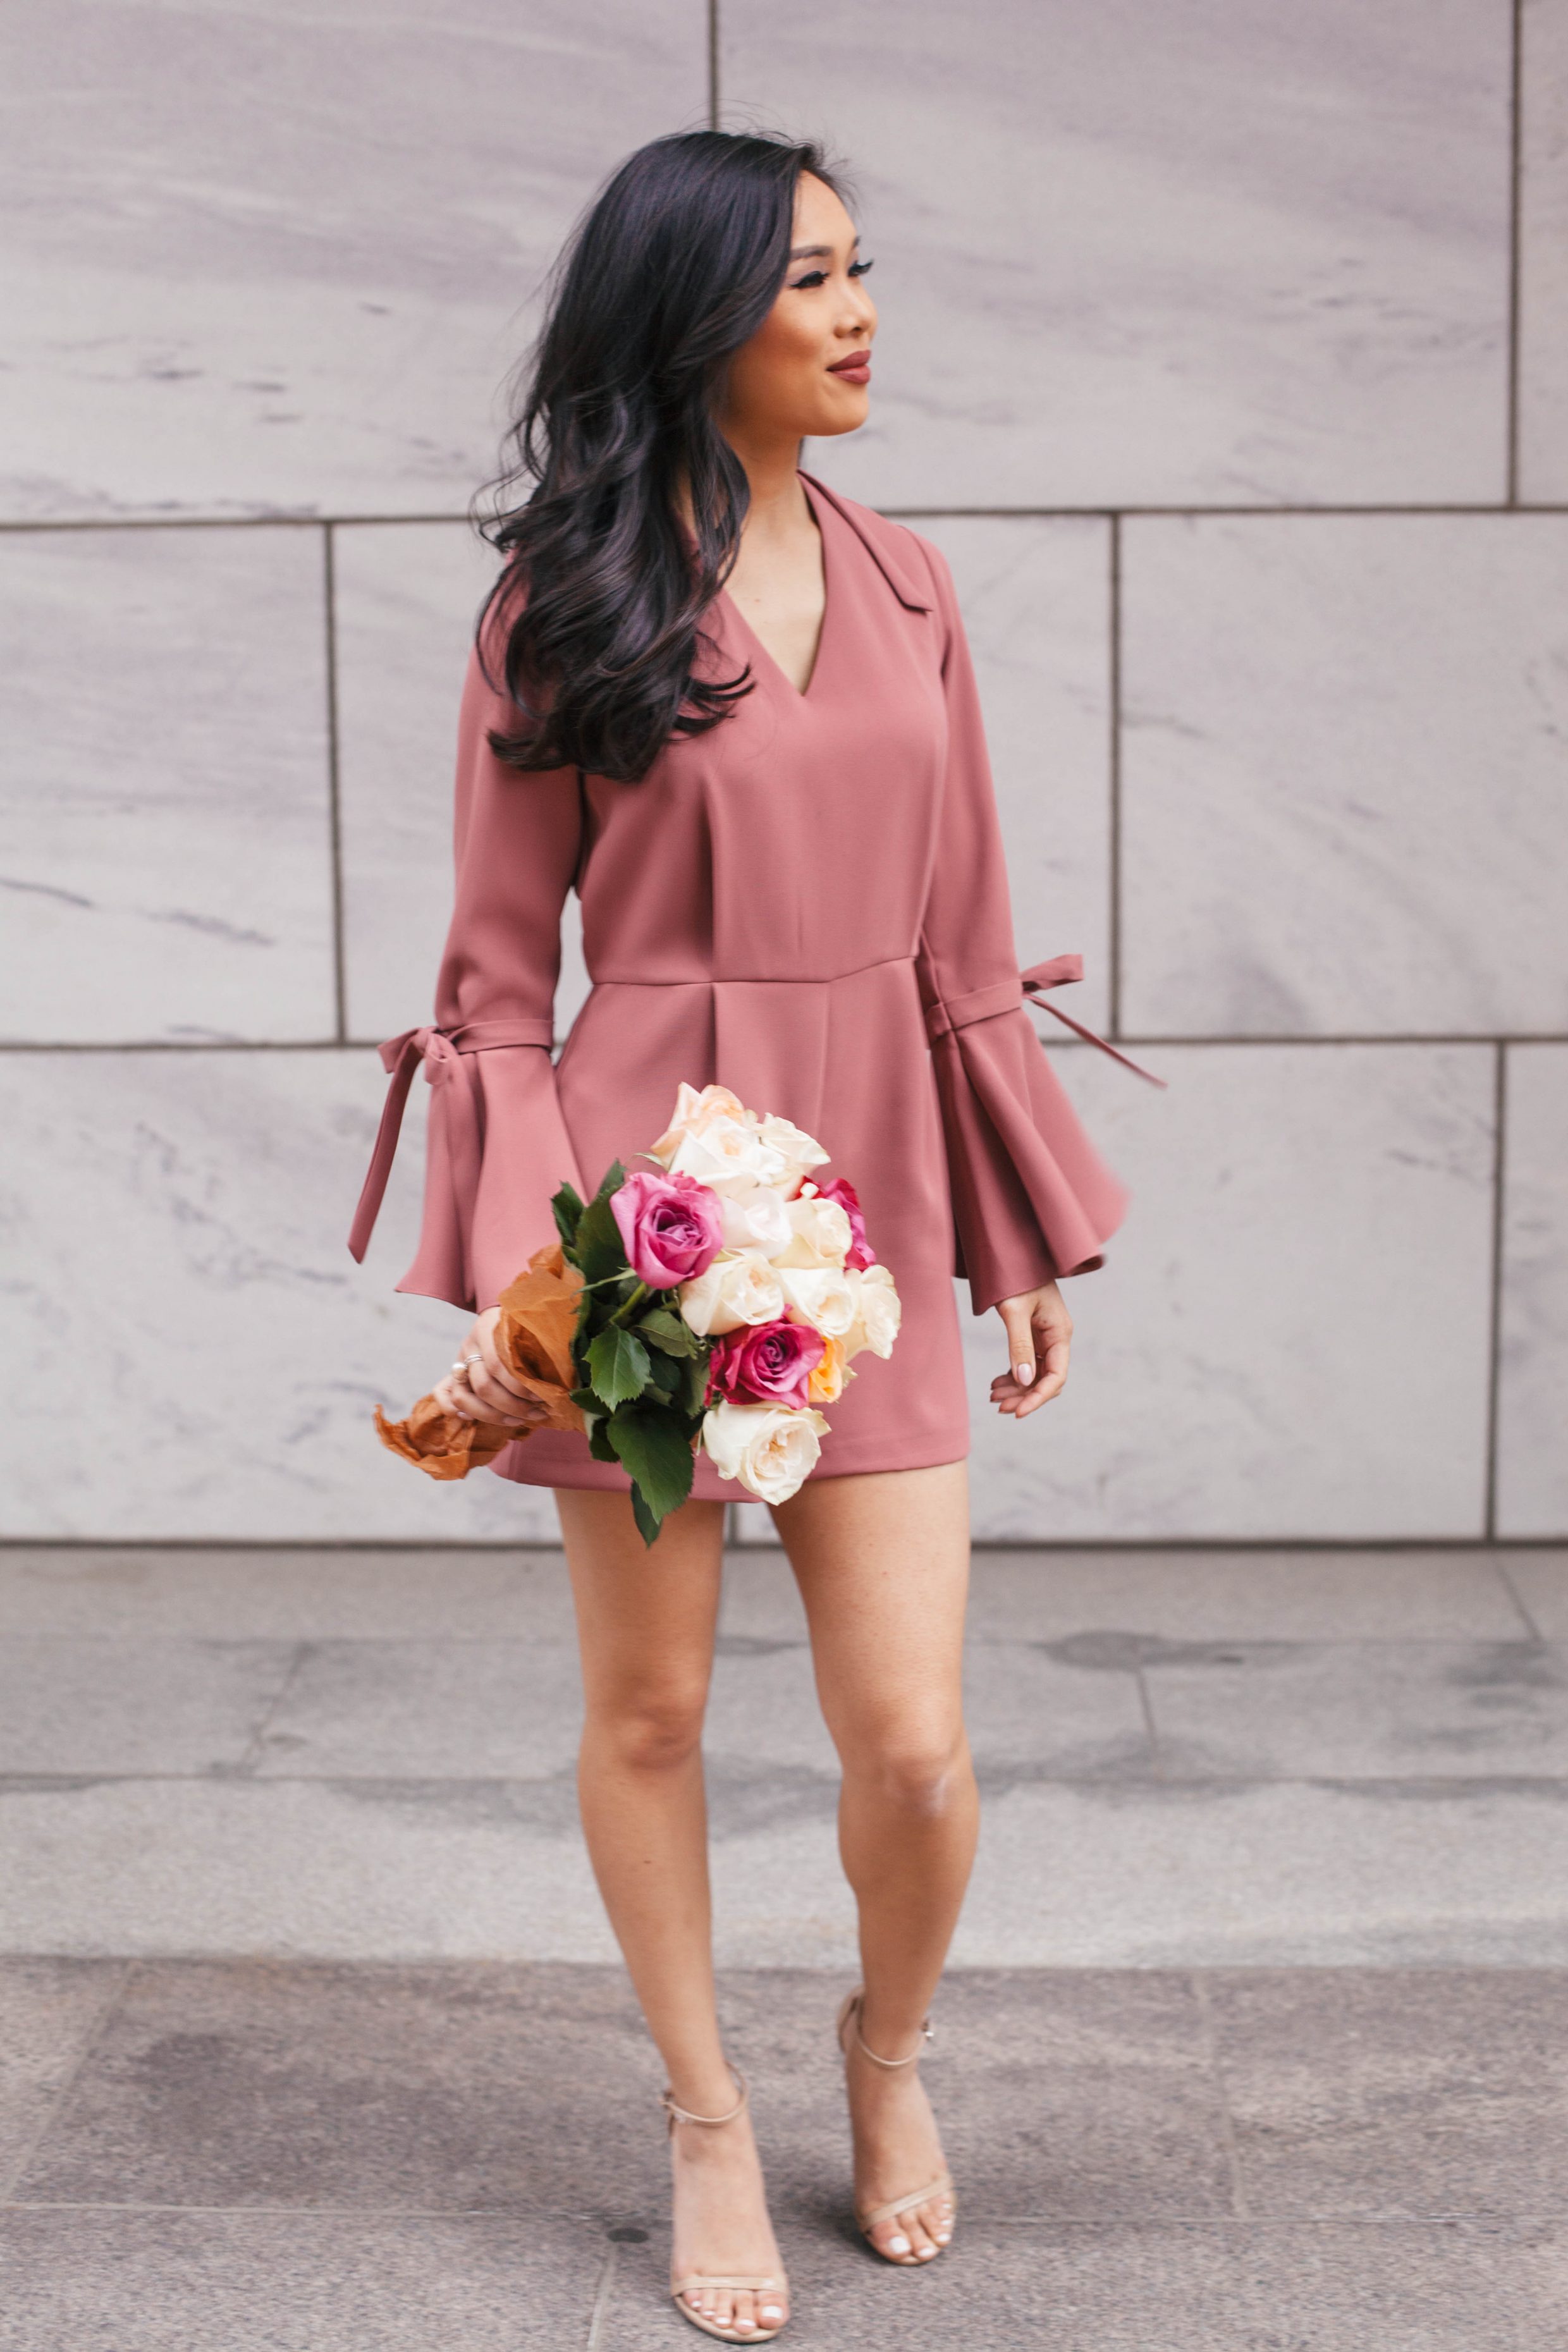 Blogger Hoang-Kim wears a trumpet sleeve romper with Trollbeads jewelry